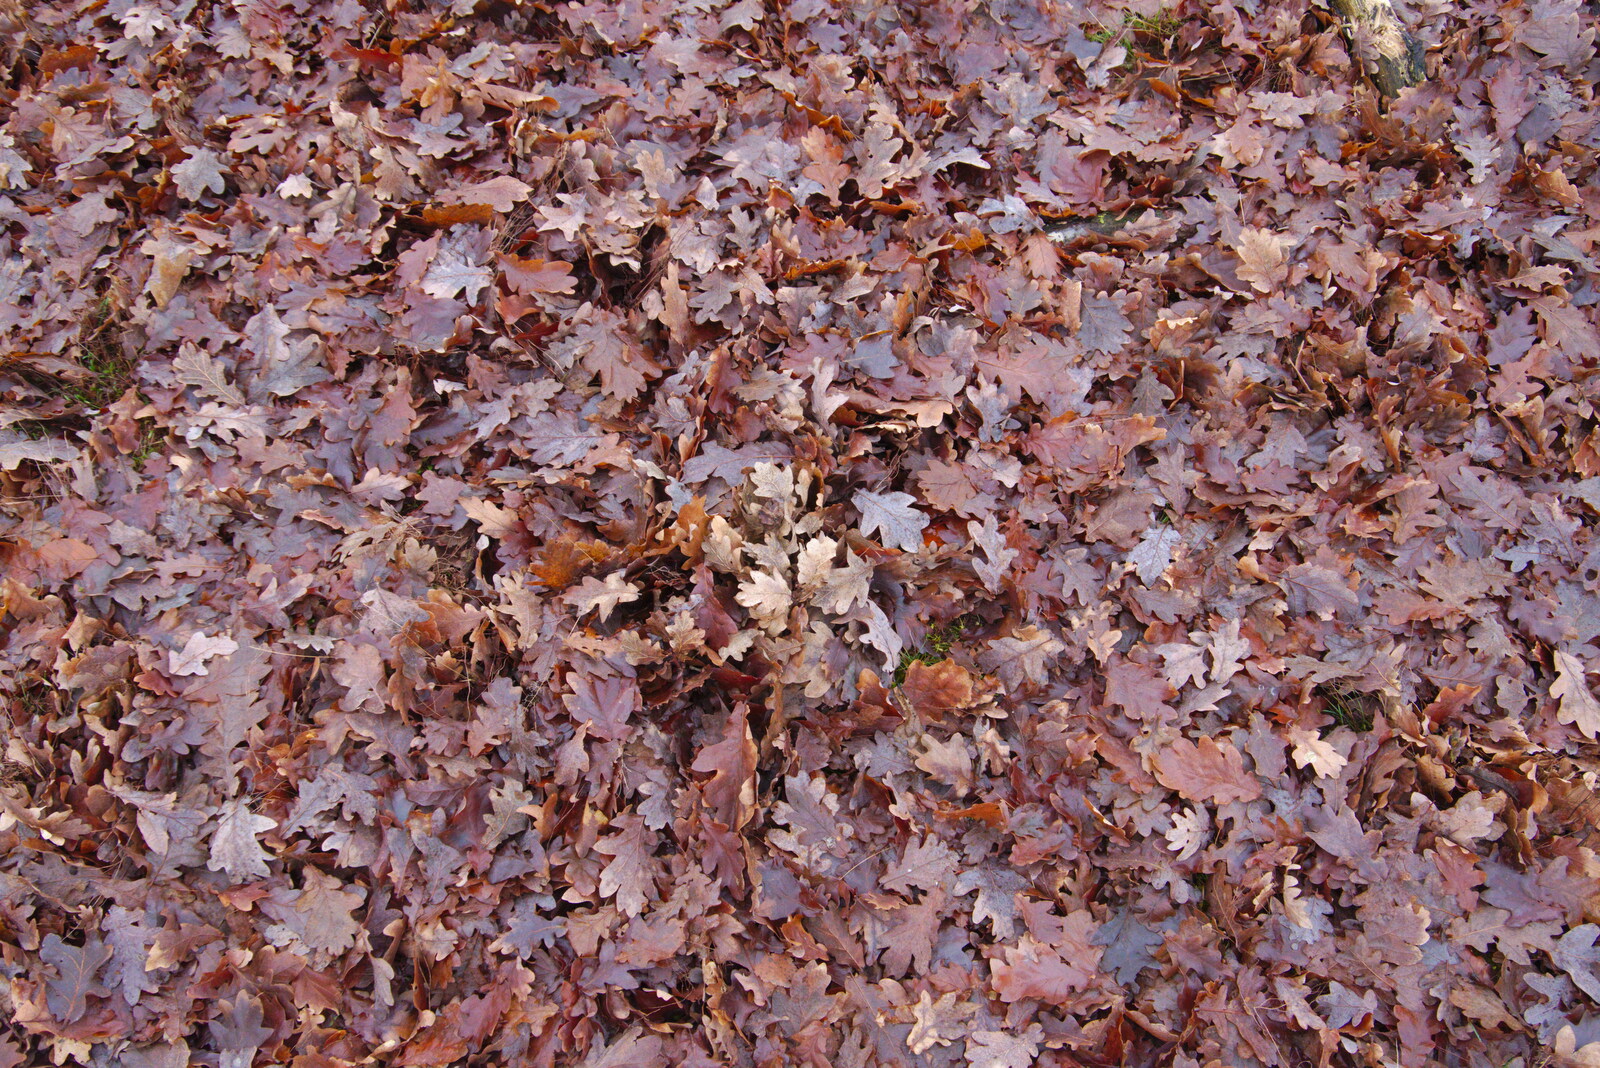 A carpet of oak leaves from New Year's Day on the Ling, Wortham, Suffolk - 1st January 2020